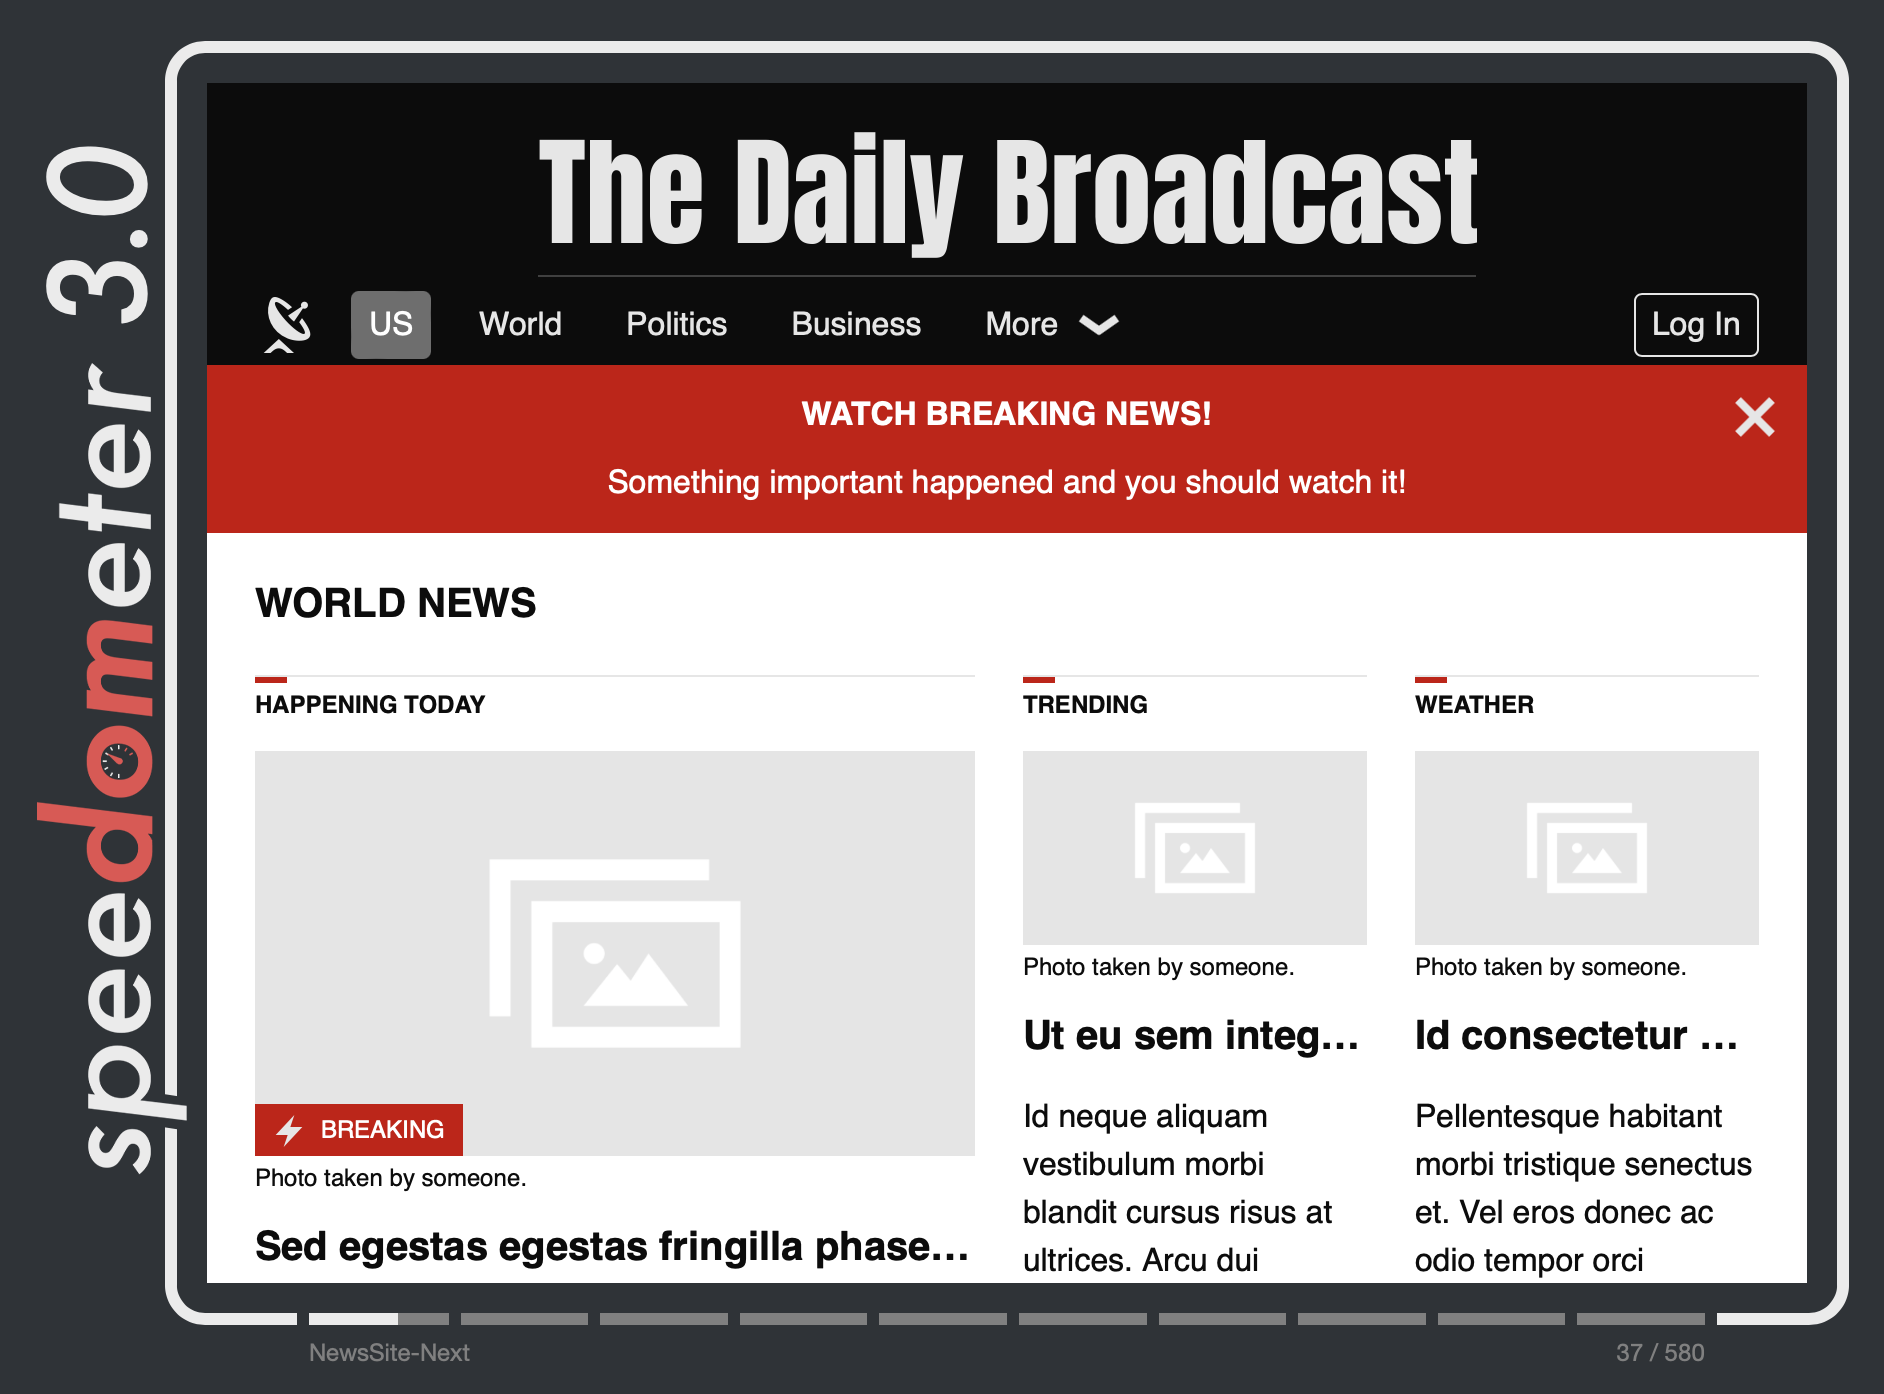 News sites workload mimics a popular news site with navigation menu, hero images, headlines, and a summary of articles.